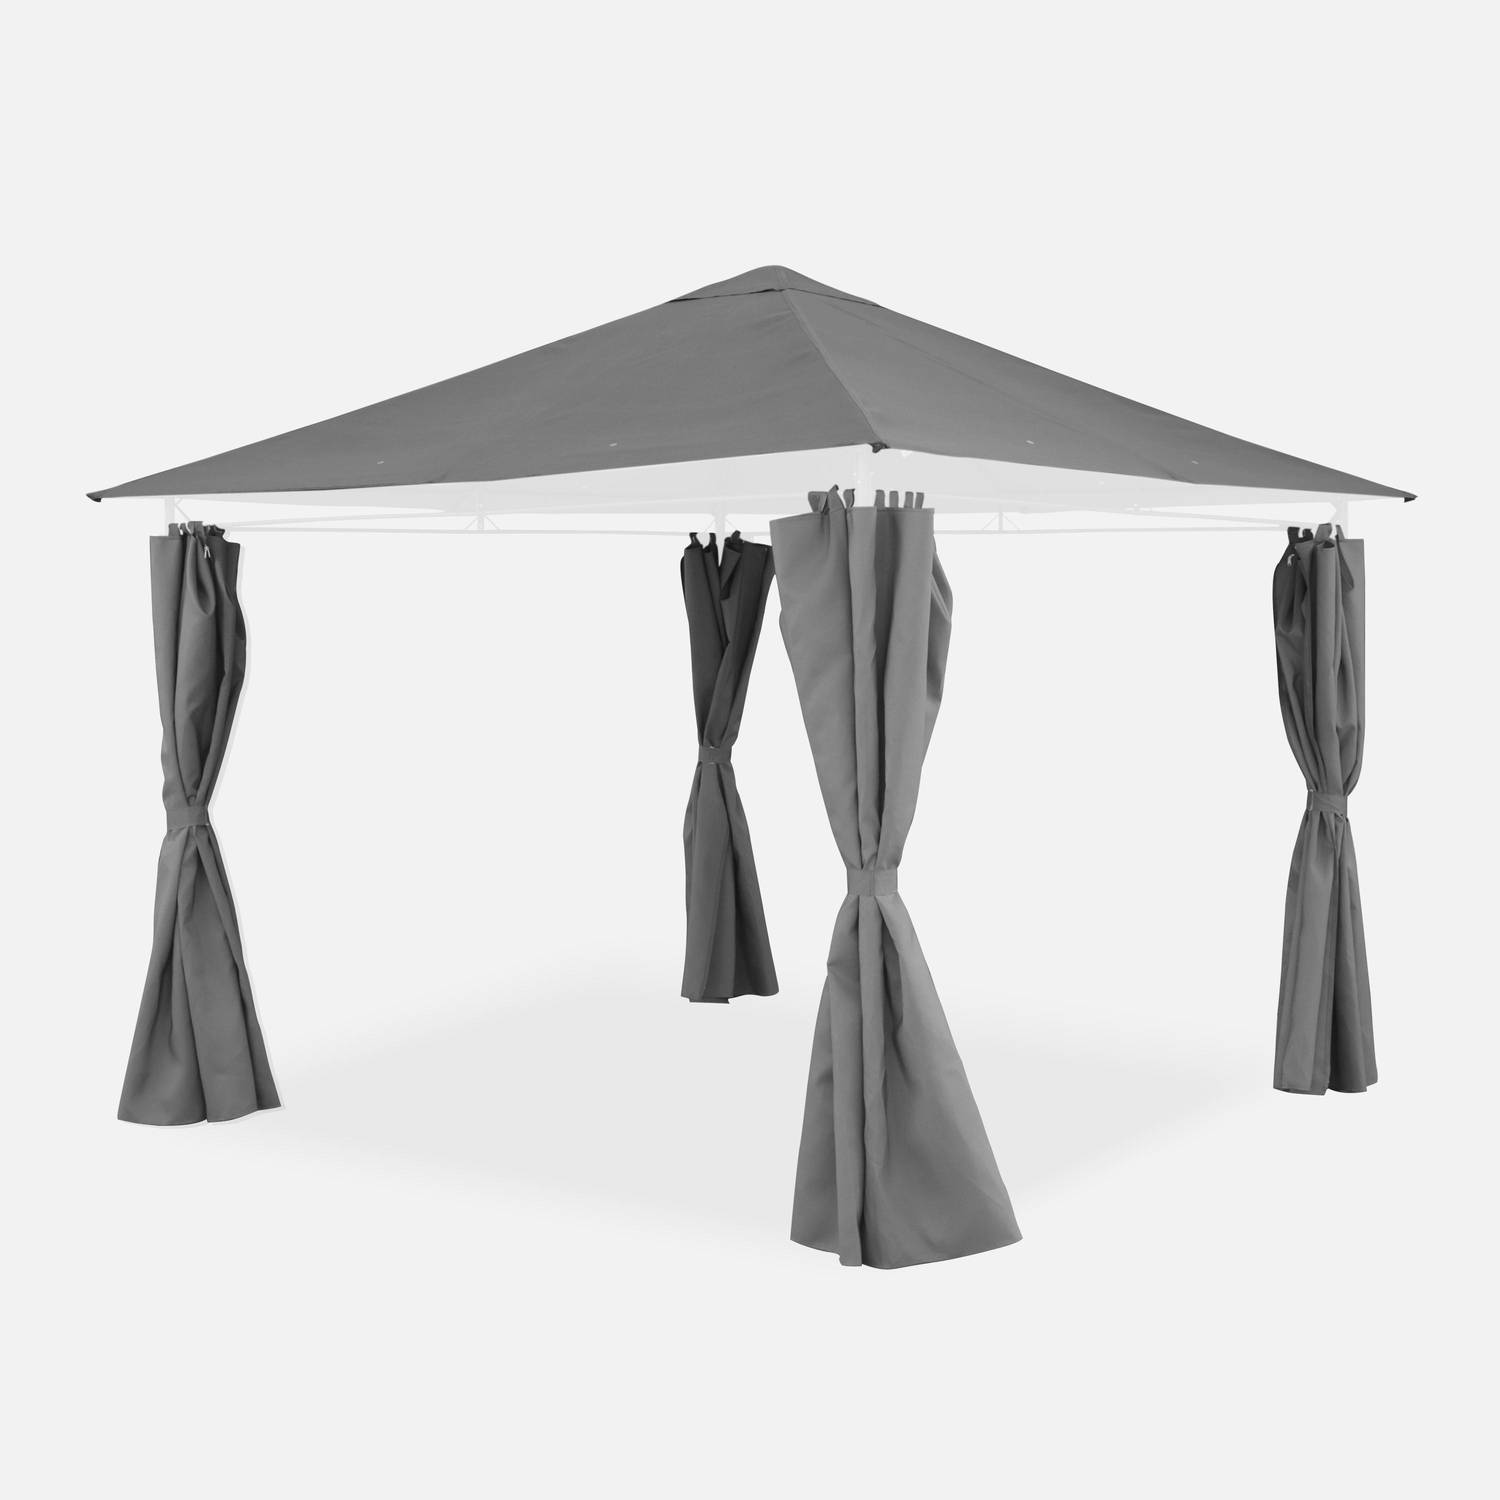 Replacement canopy and side curtain kit for Elusa 3x3m gazebo - replacement gazebo canopy and side curtains - Grey Photo1